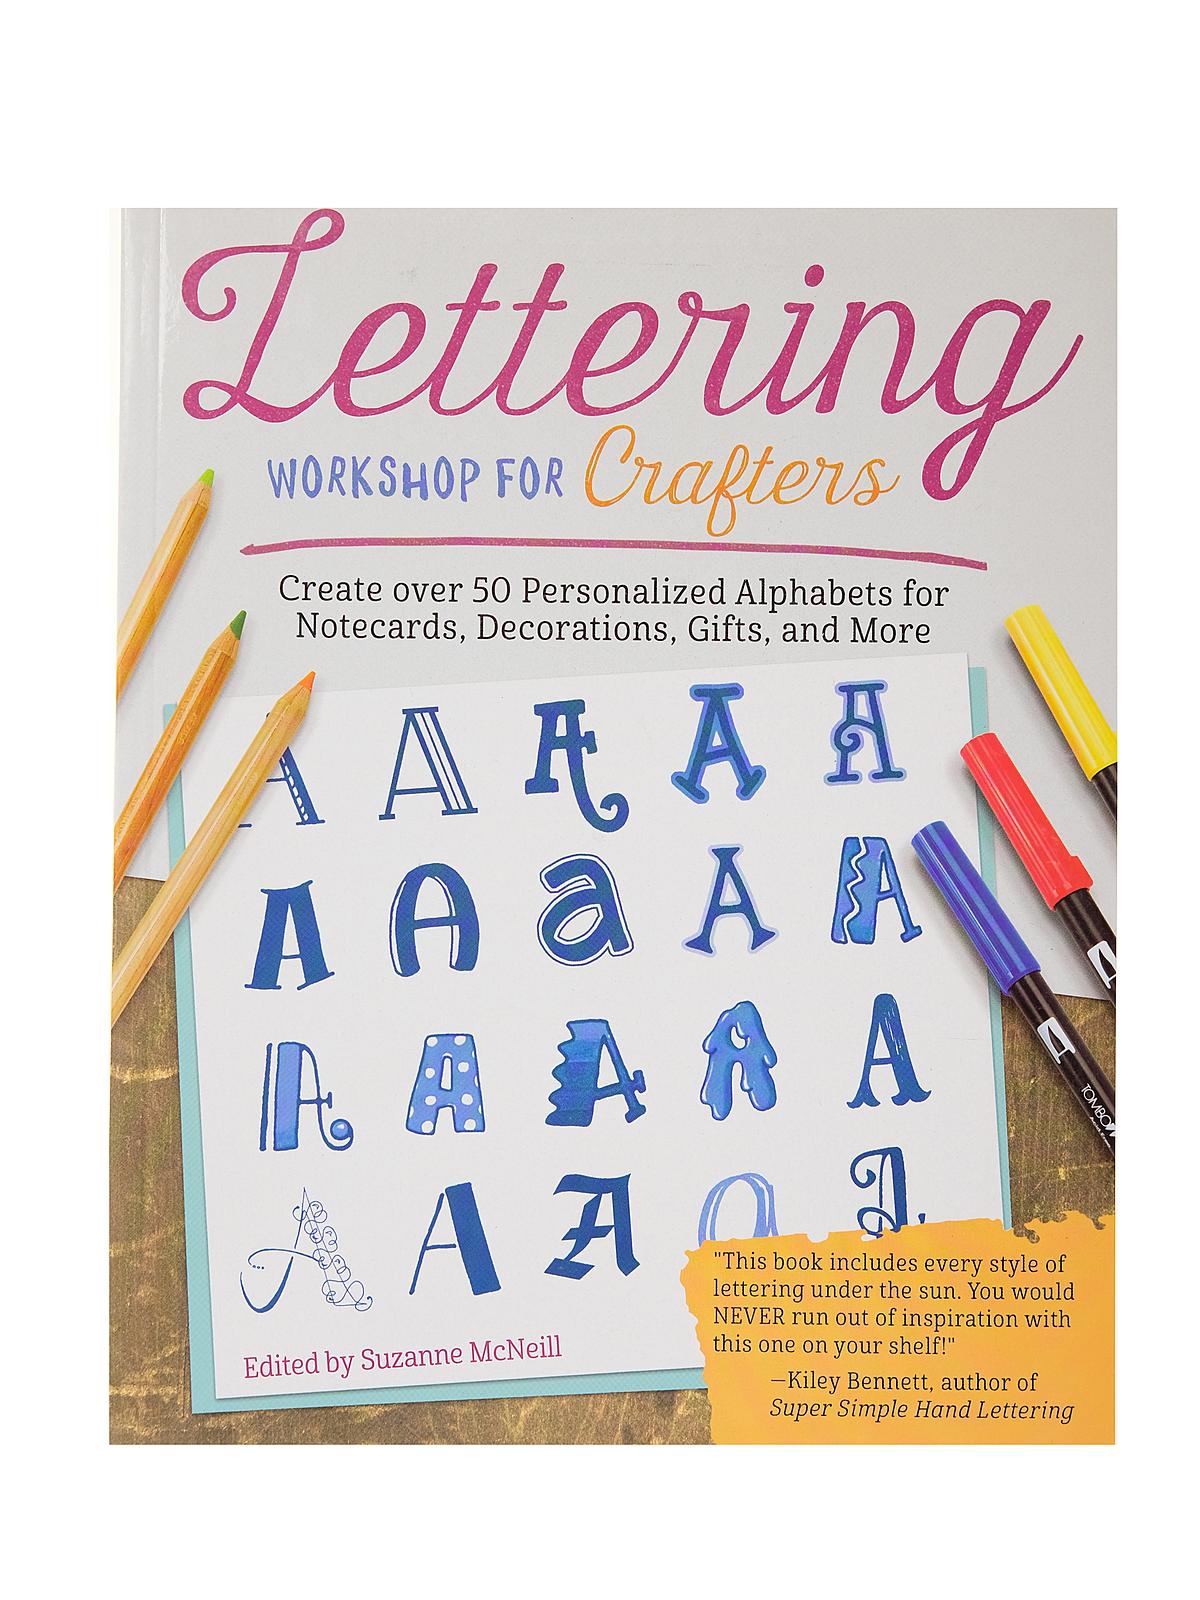 Lettering Workshop For The Crafters Each